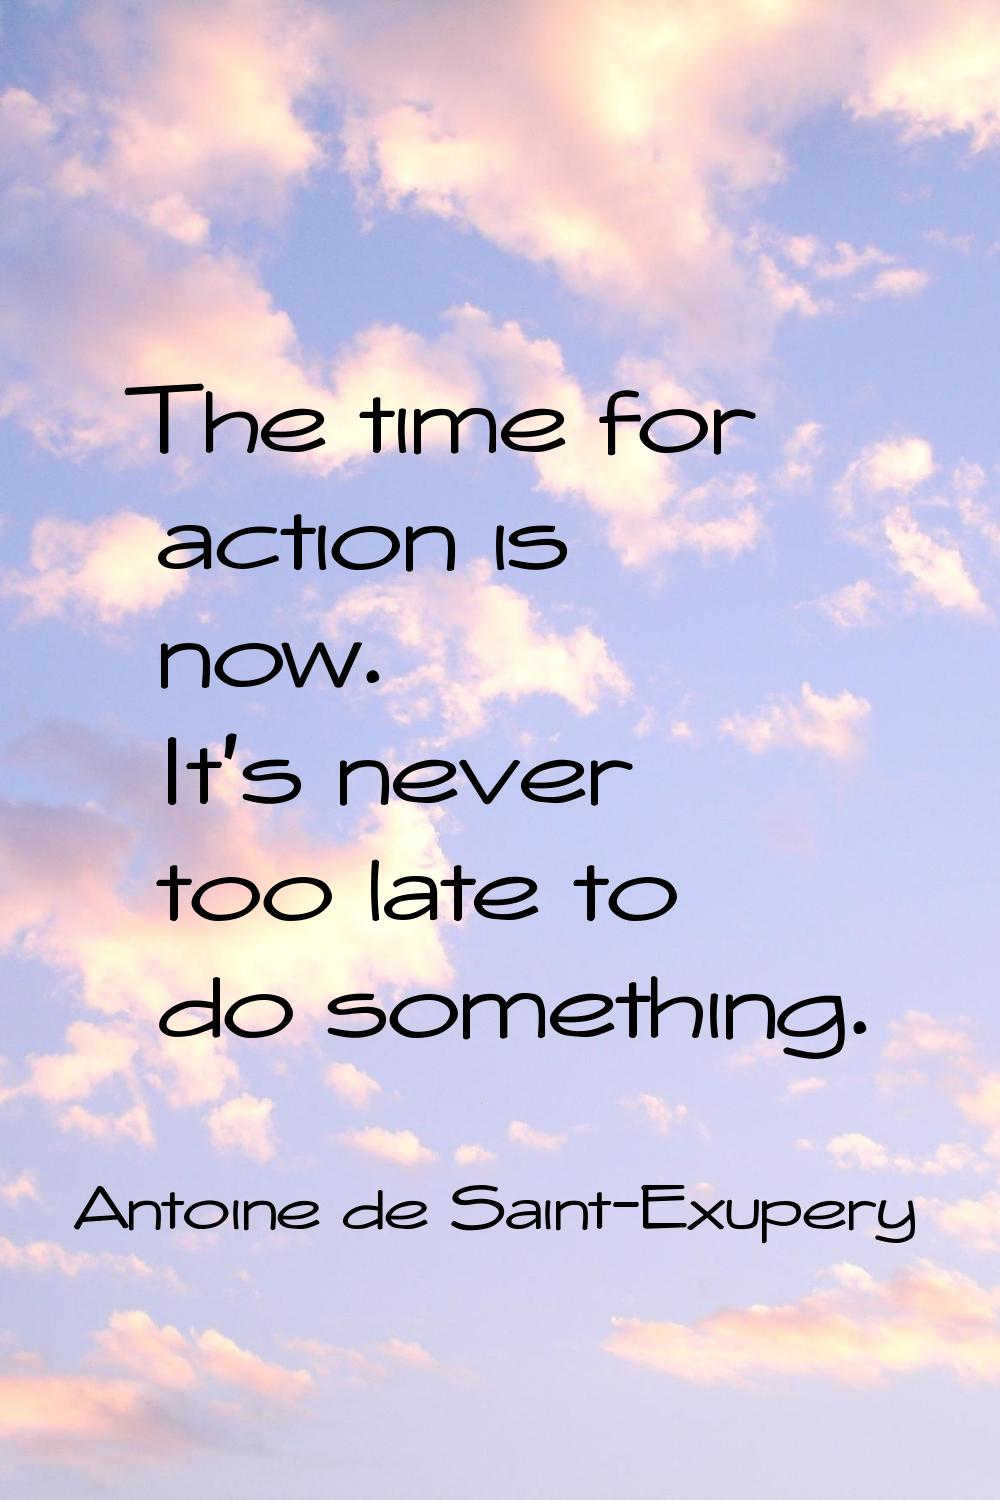 The time for action is now. It's never too late to do something.